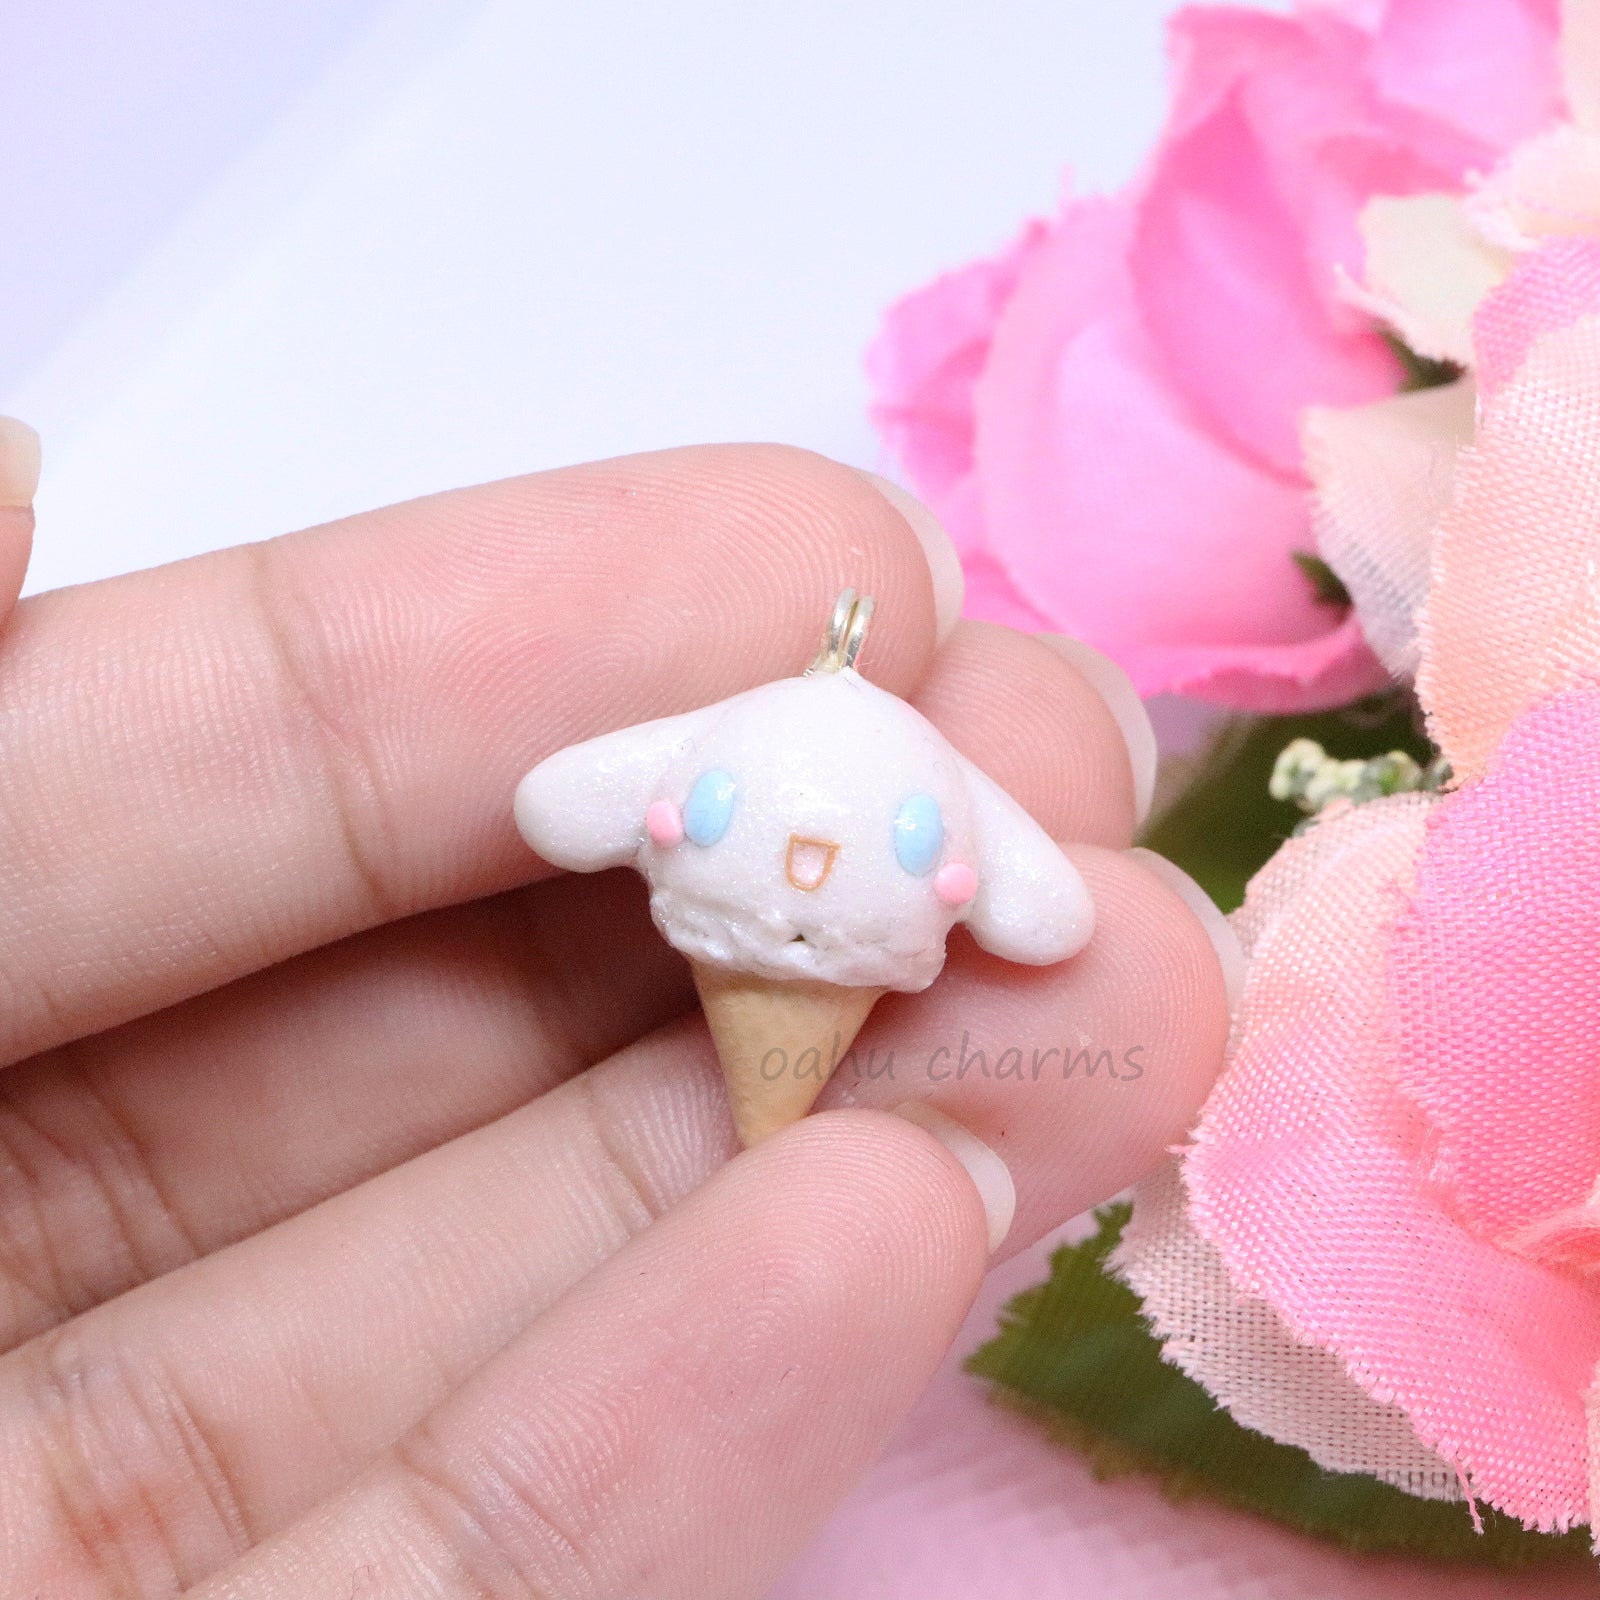 White Puppy Ice Cream Polymer Clay Charm – Oahu Charms